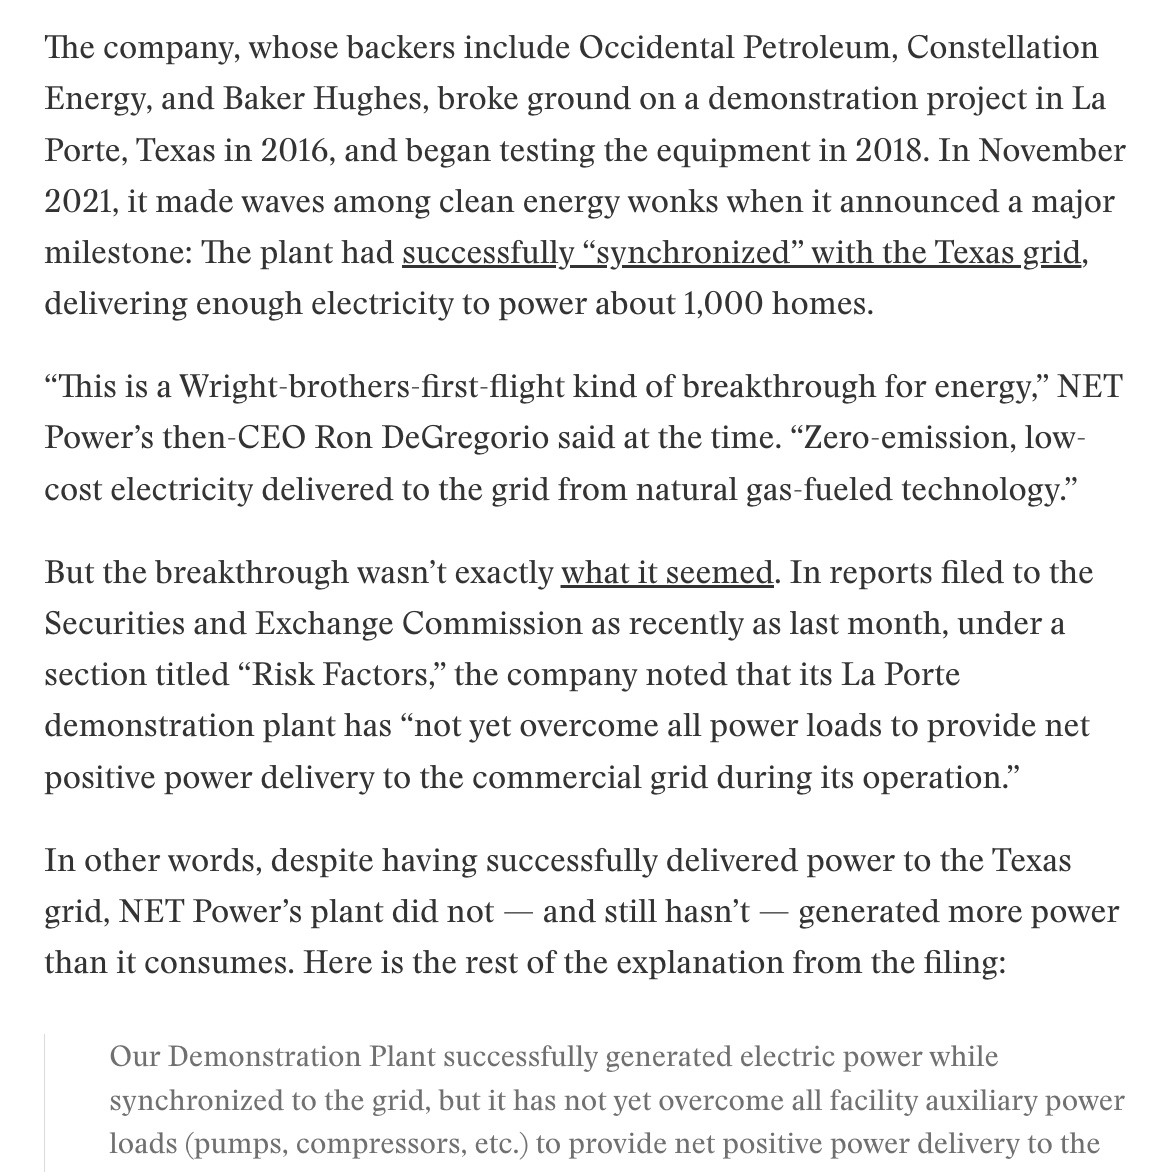 Quite a discovery in SEC docs from @emilypont: NET Power, which says it can generate electricity from natural gas without emitting carbon pollution, hasn’t yet achieved *net* power production. $NPWR